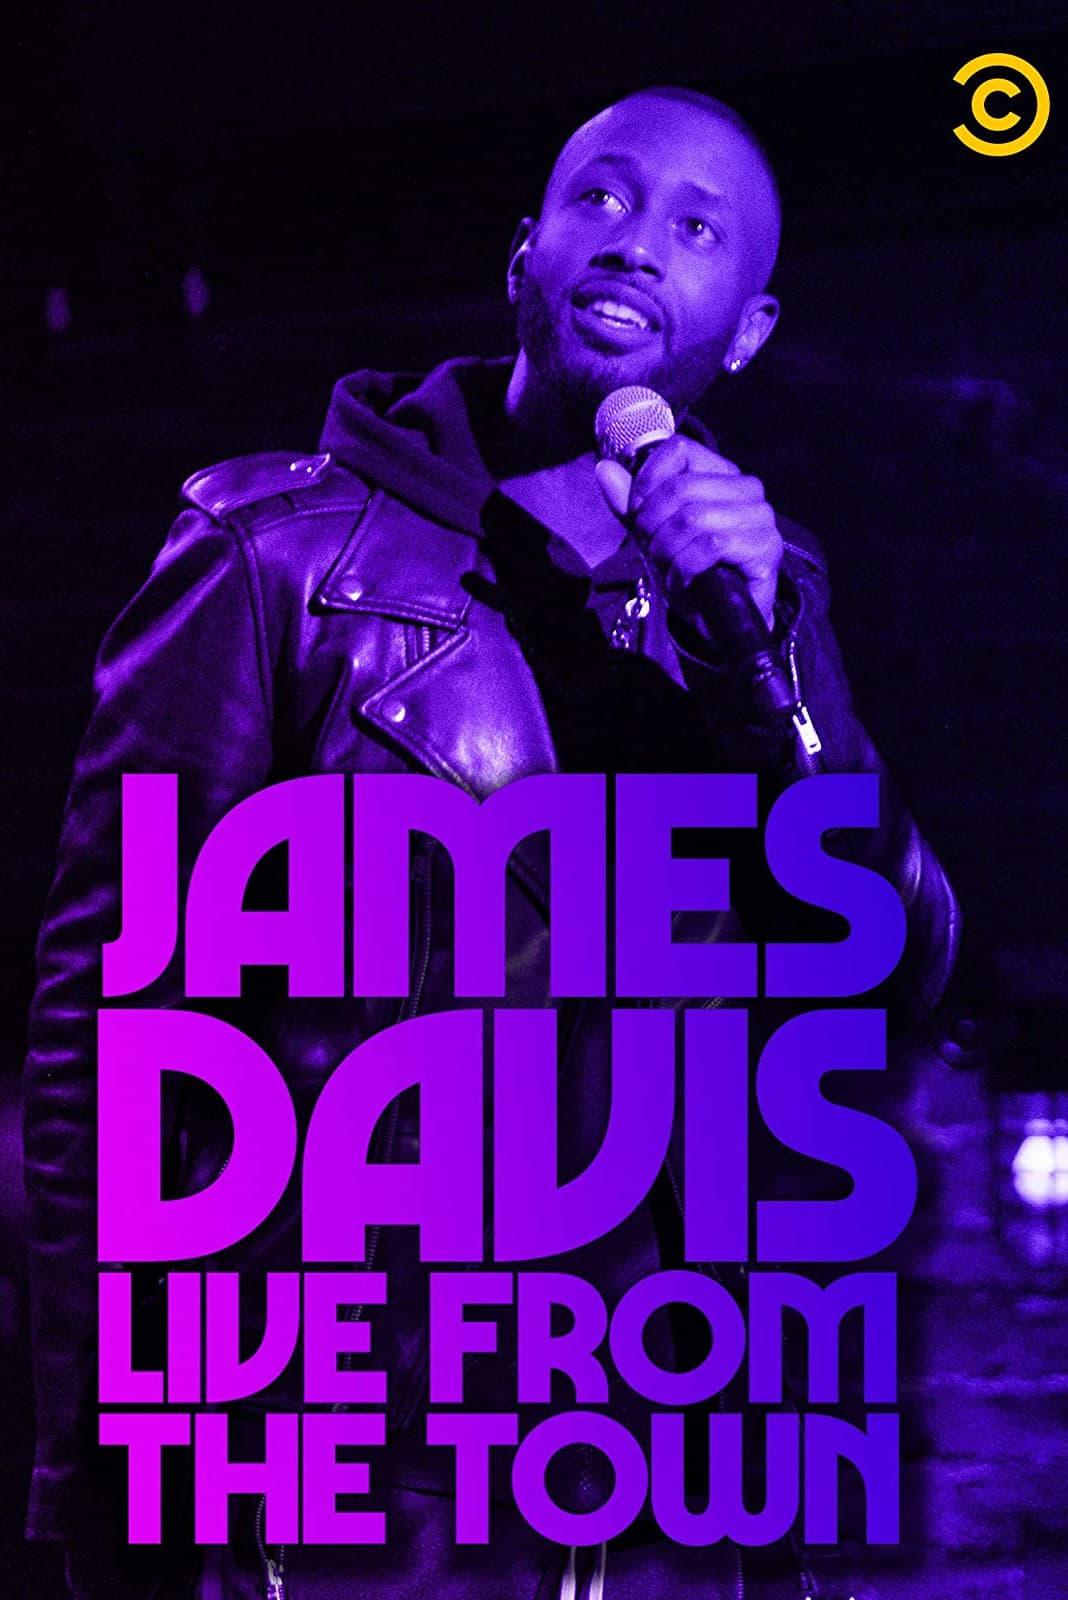 James Davis: Live from the Town poster